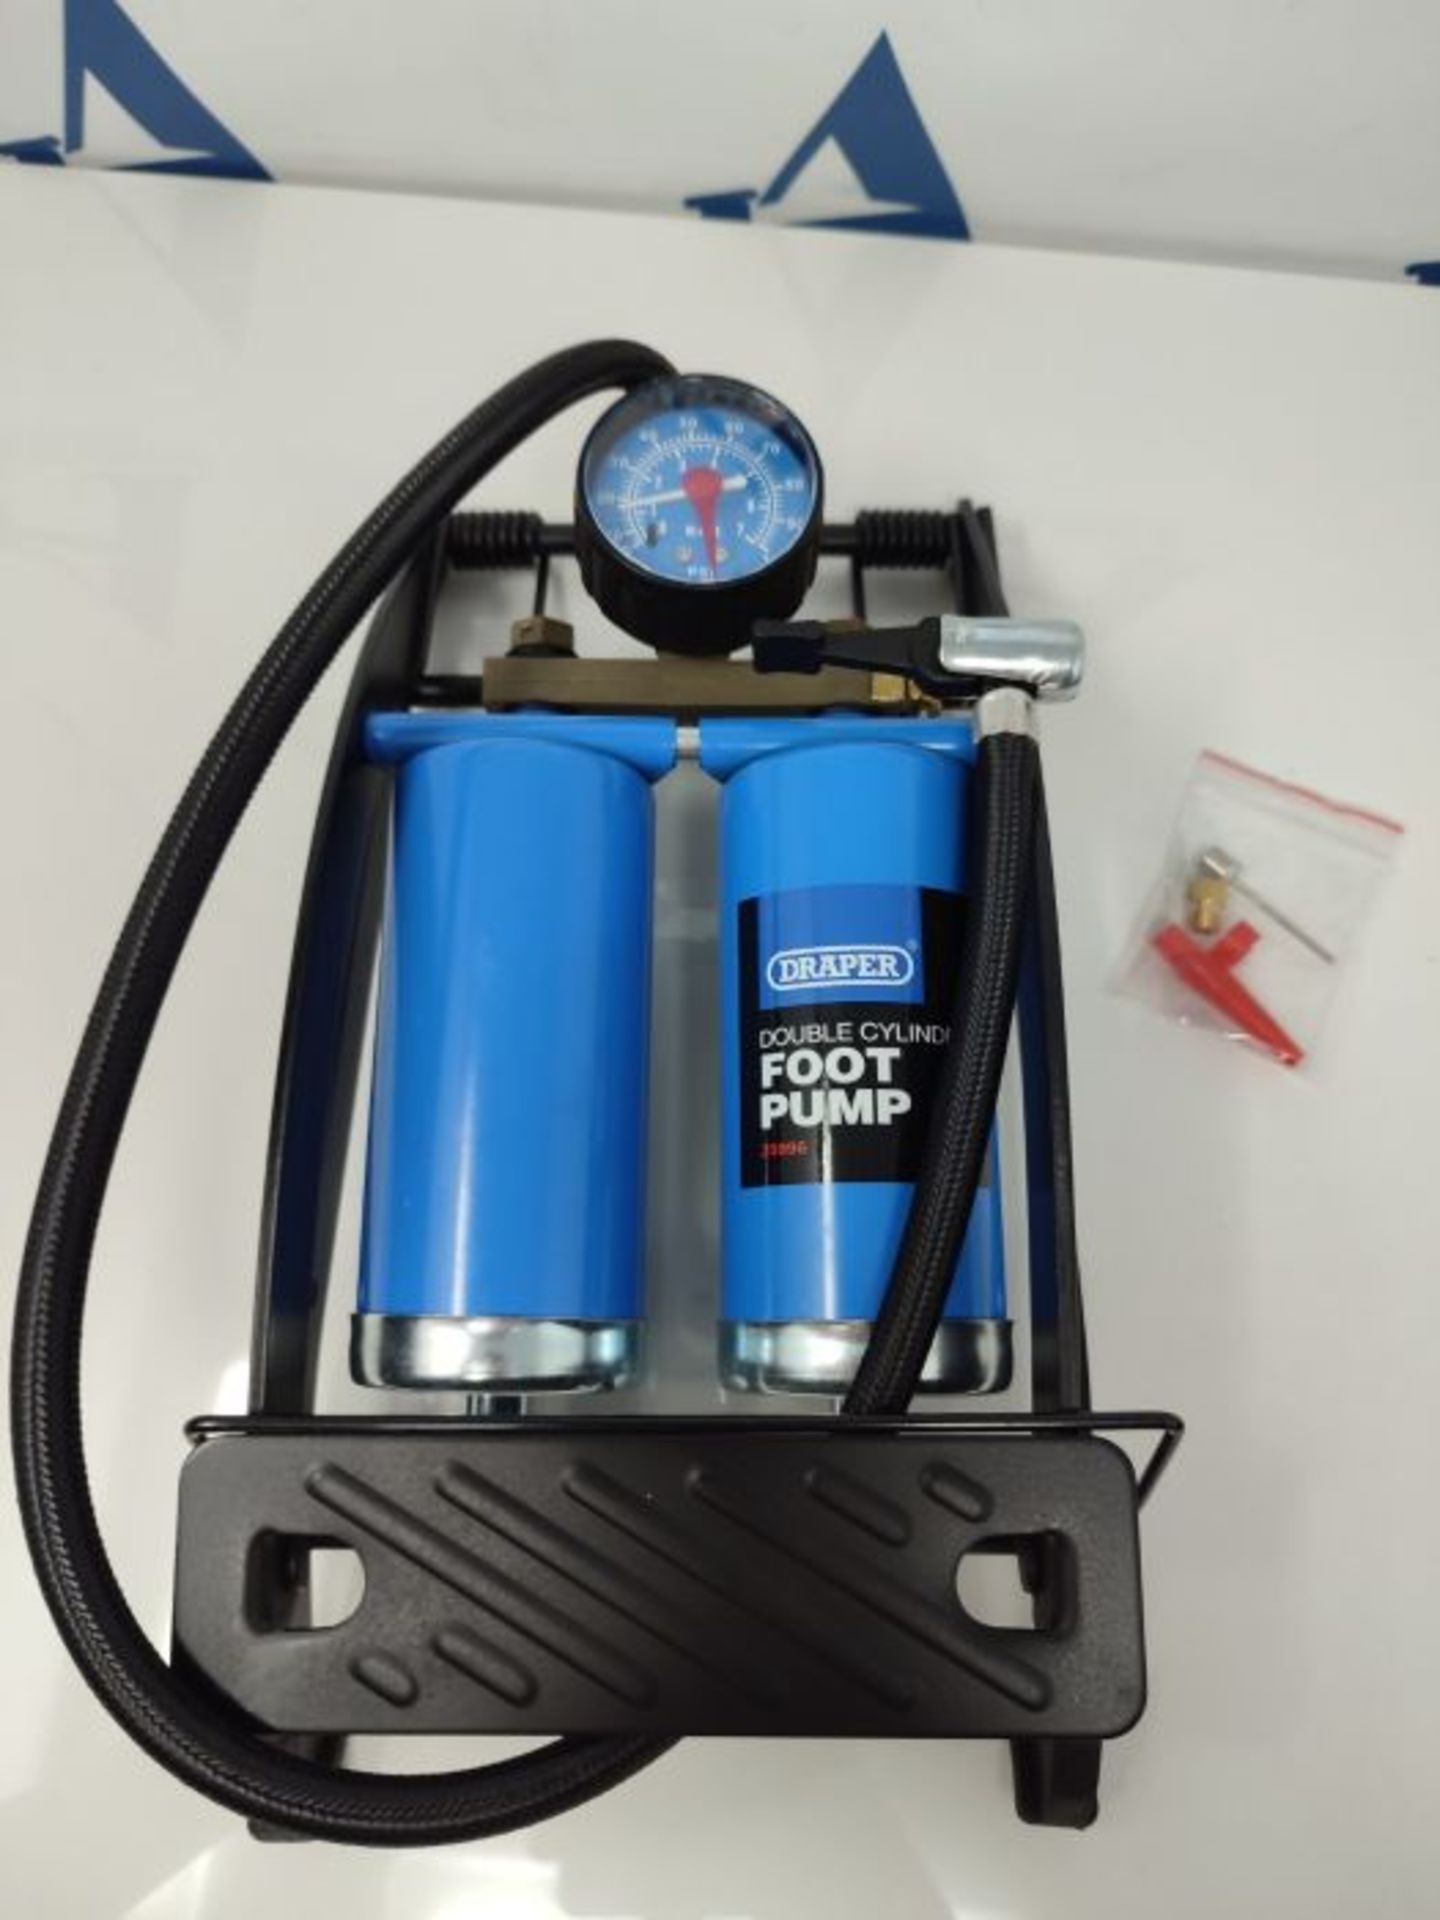 Draper 25996 Double Twin Cylinder Foot Pump with Gauge 890004, Blue - Image 3 of 3